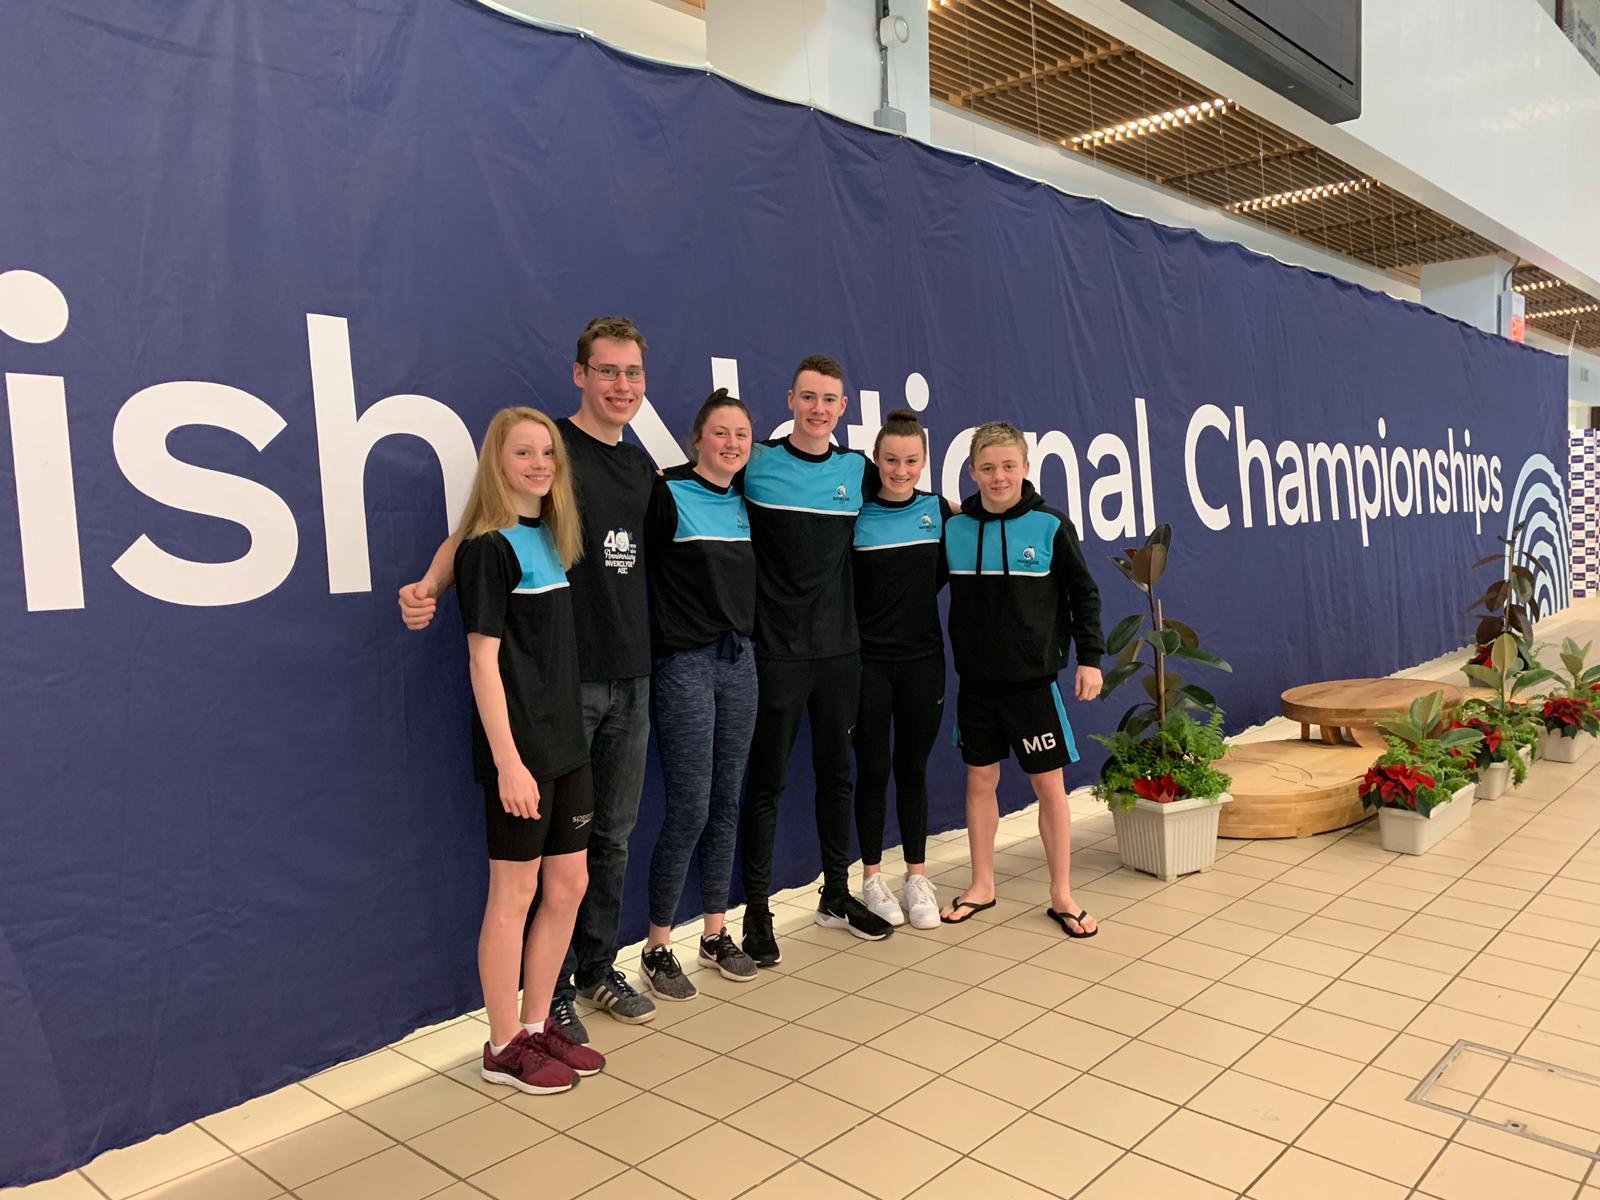 Inverclyde Amateur Swimming Club proudly represented at Scottish National Short Course Championships in Edinburgh